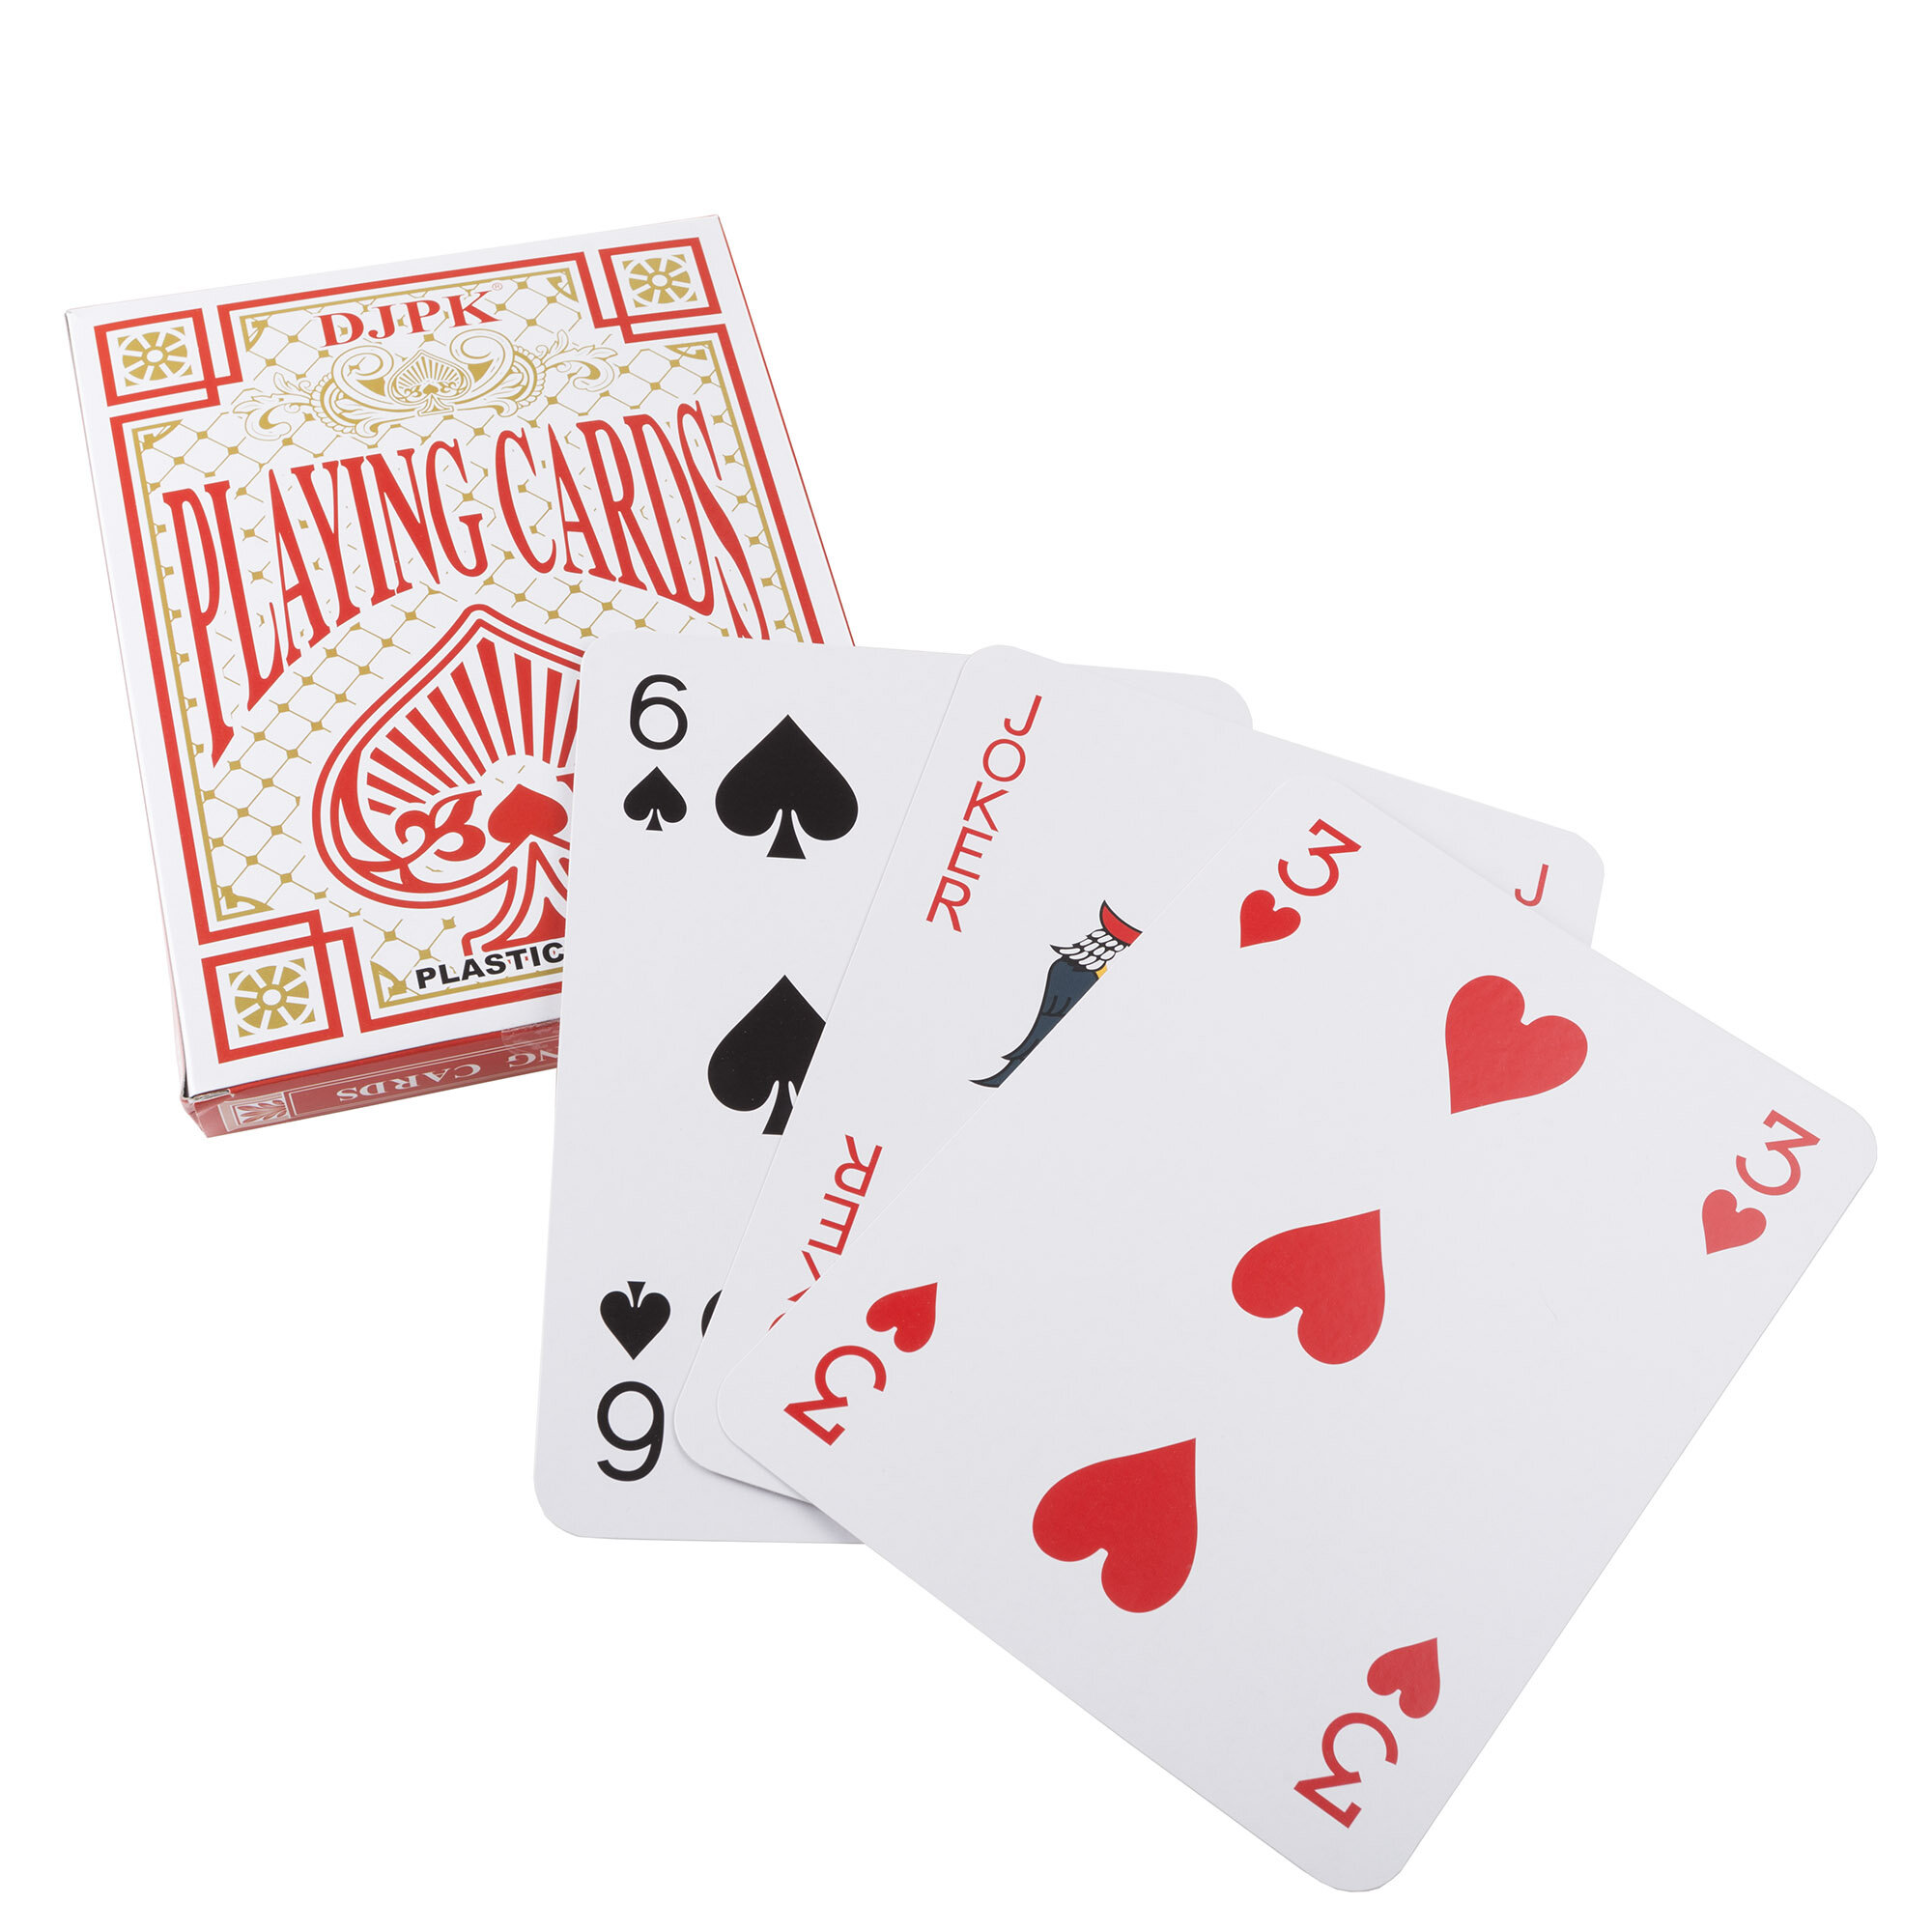 Plastic Coated Playing Cards Standard Size Deck Kids Adults Poker Casino Cards 